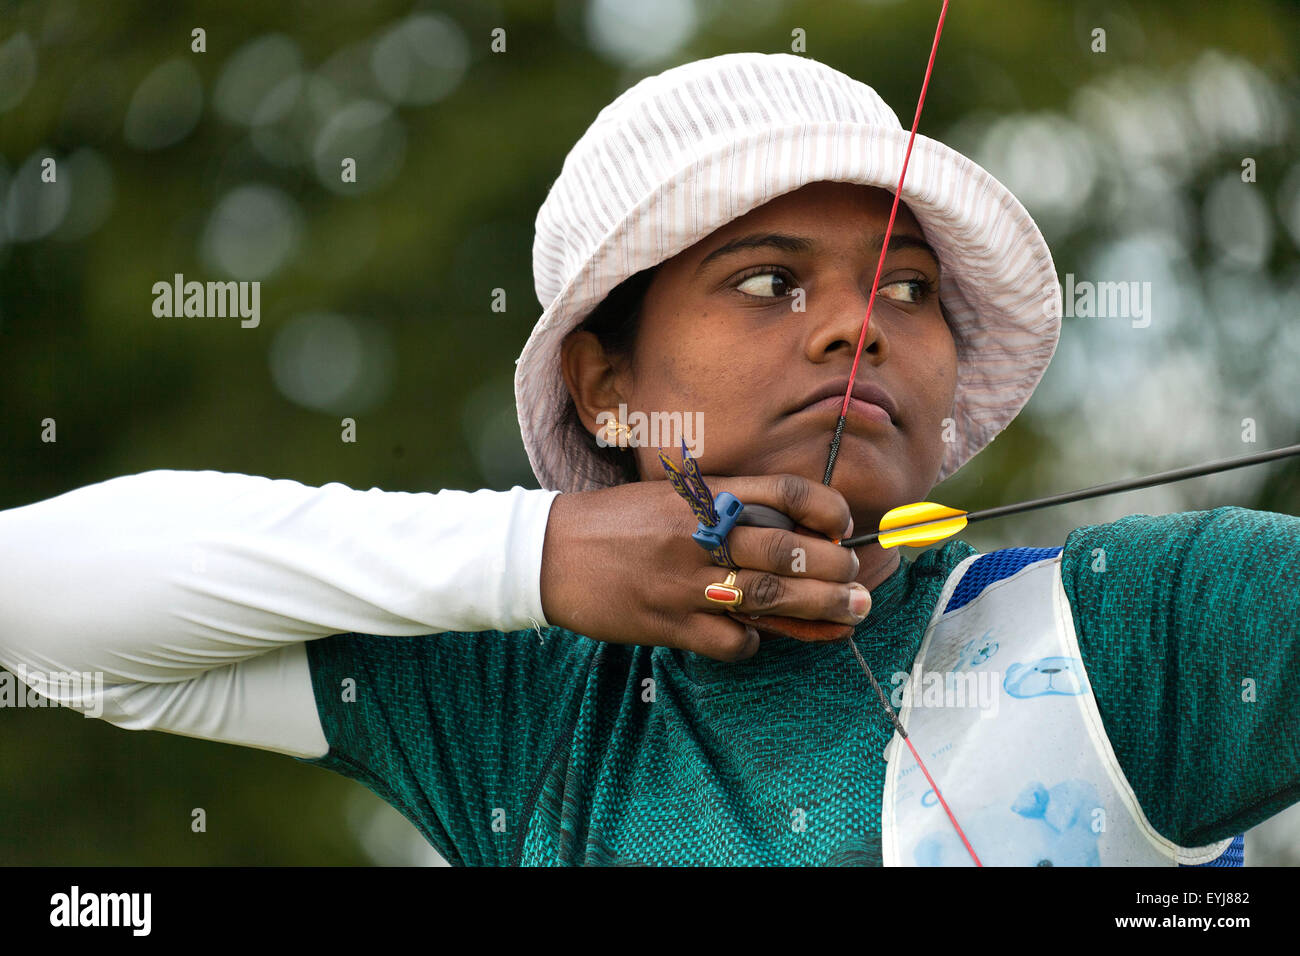 Copenhagen, Denmark, July 30th, 2015: Indian archer Laxmirani Mahji competes in the World Archery Championships in Copenhagen during Thursday's individual matches  in recurve bow. Credit:  OJPHOTOS/Alamy Live News Stock Photo